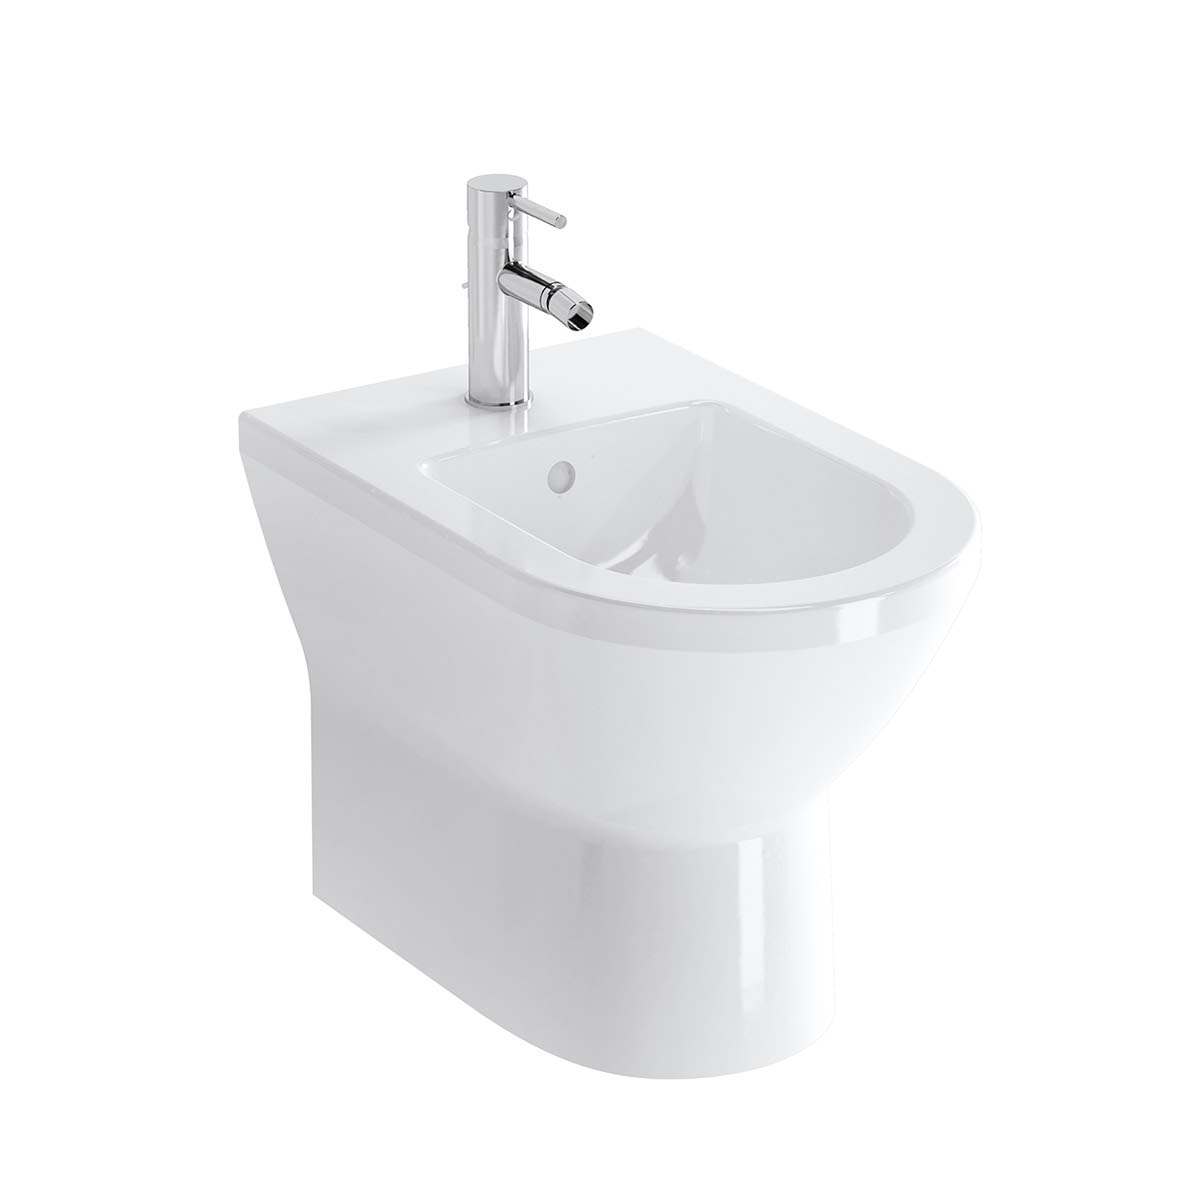 Floor Standing Bidet, Back-To-Wall, 54 cm, One Tap Hole, Without Side Holes